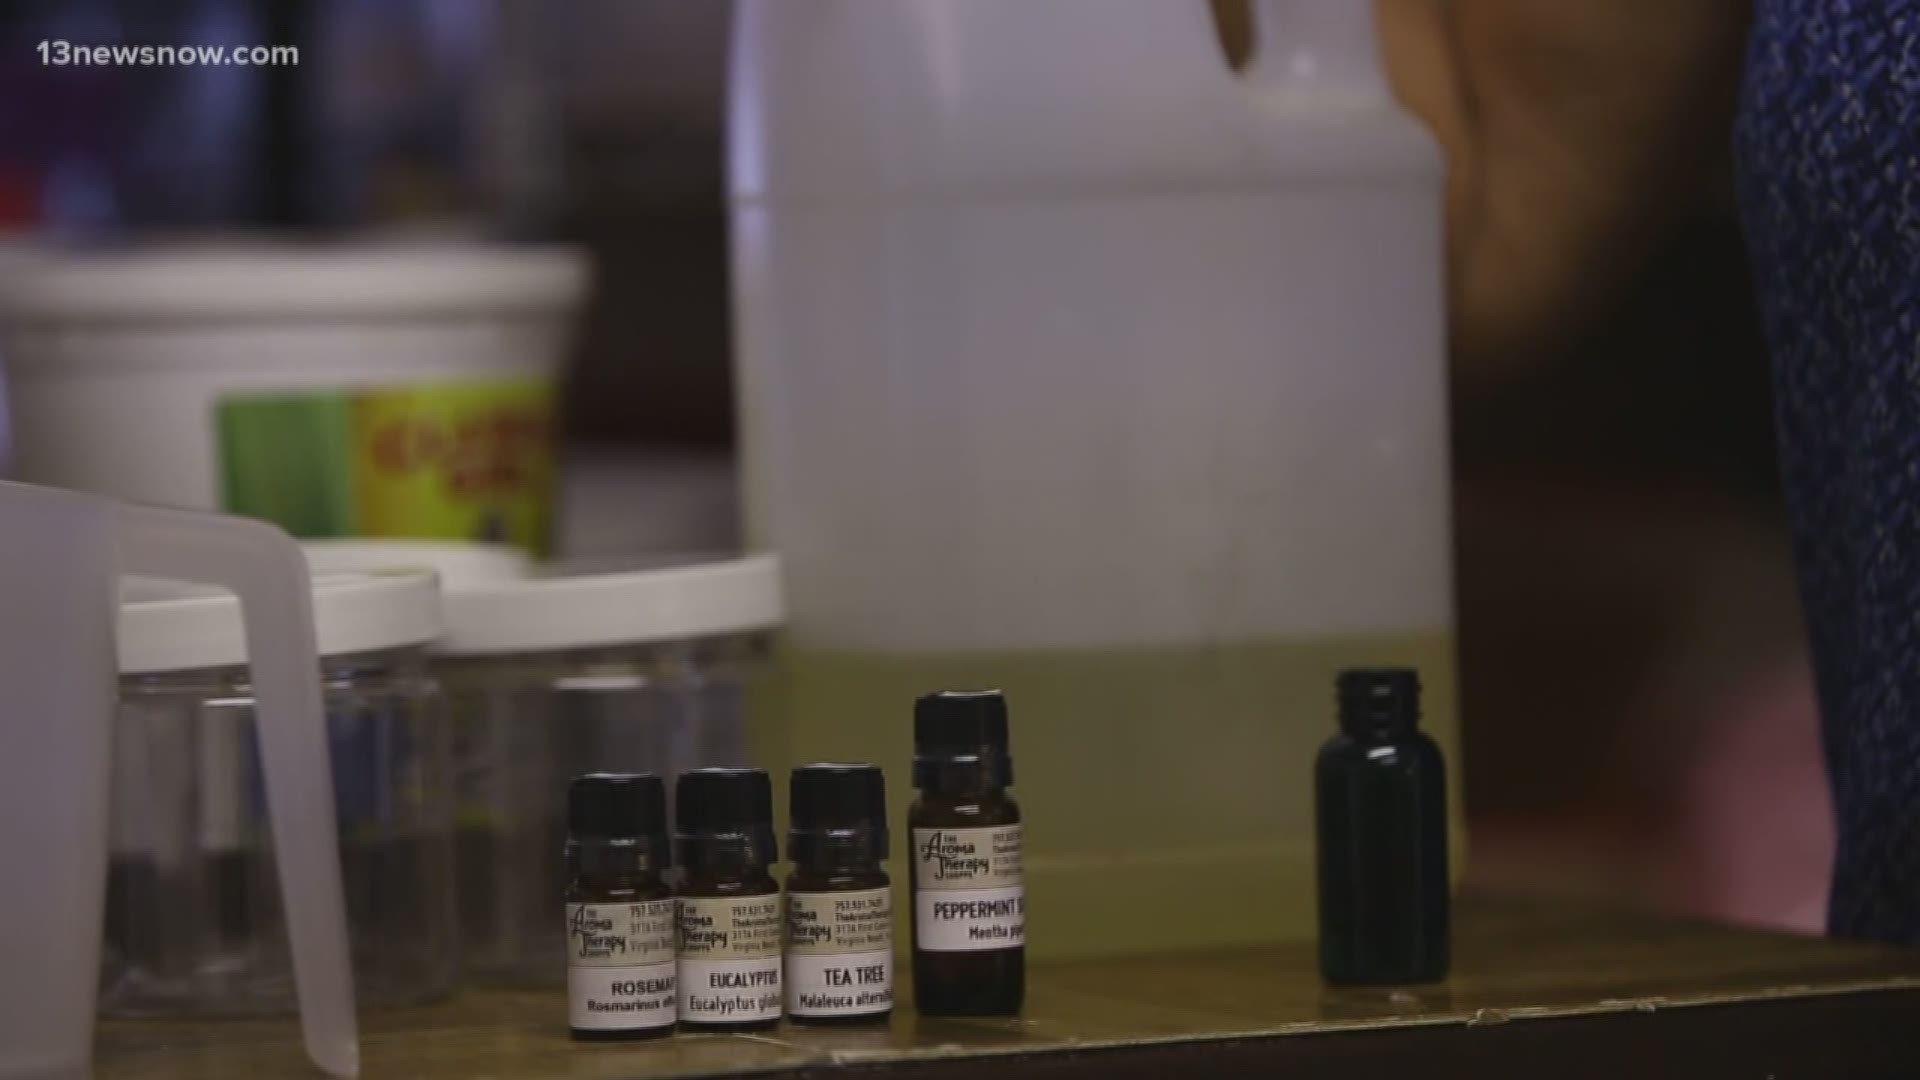 The oils have gained popularity, but users need to be wary of scams and incorrect uses. The FDA has had to crack down on companies that say essential oils can treat serious diseases.